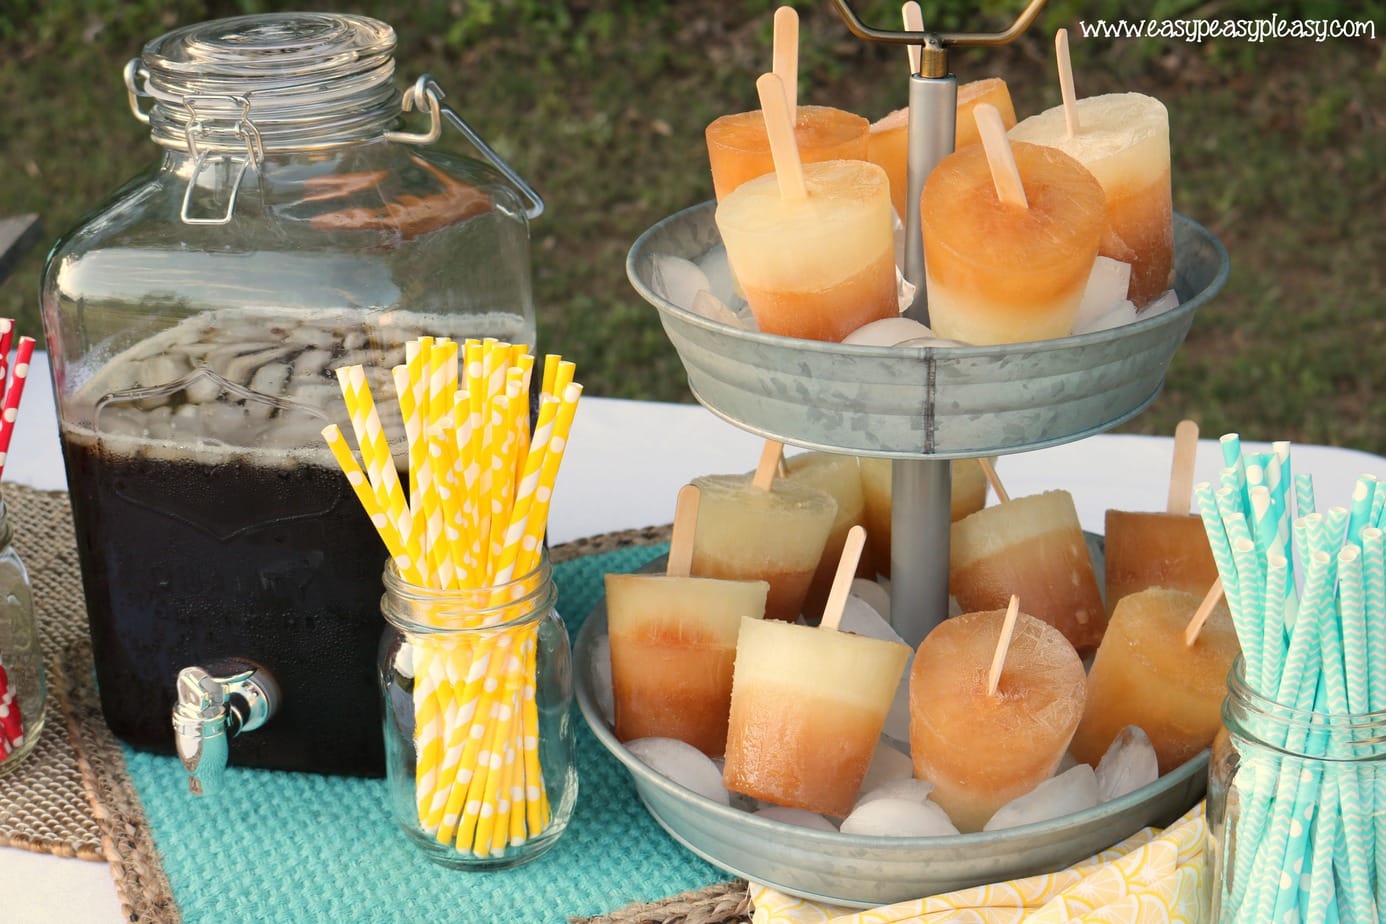 Summertime fun with frozen treats. Turn Arnold Palmer's into homemade popsicles for a fun treat.